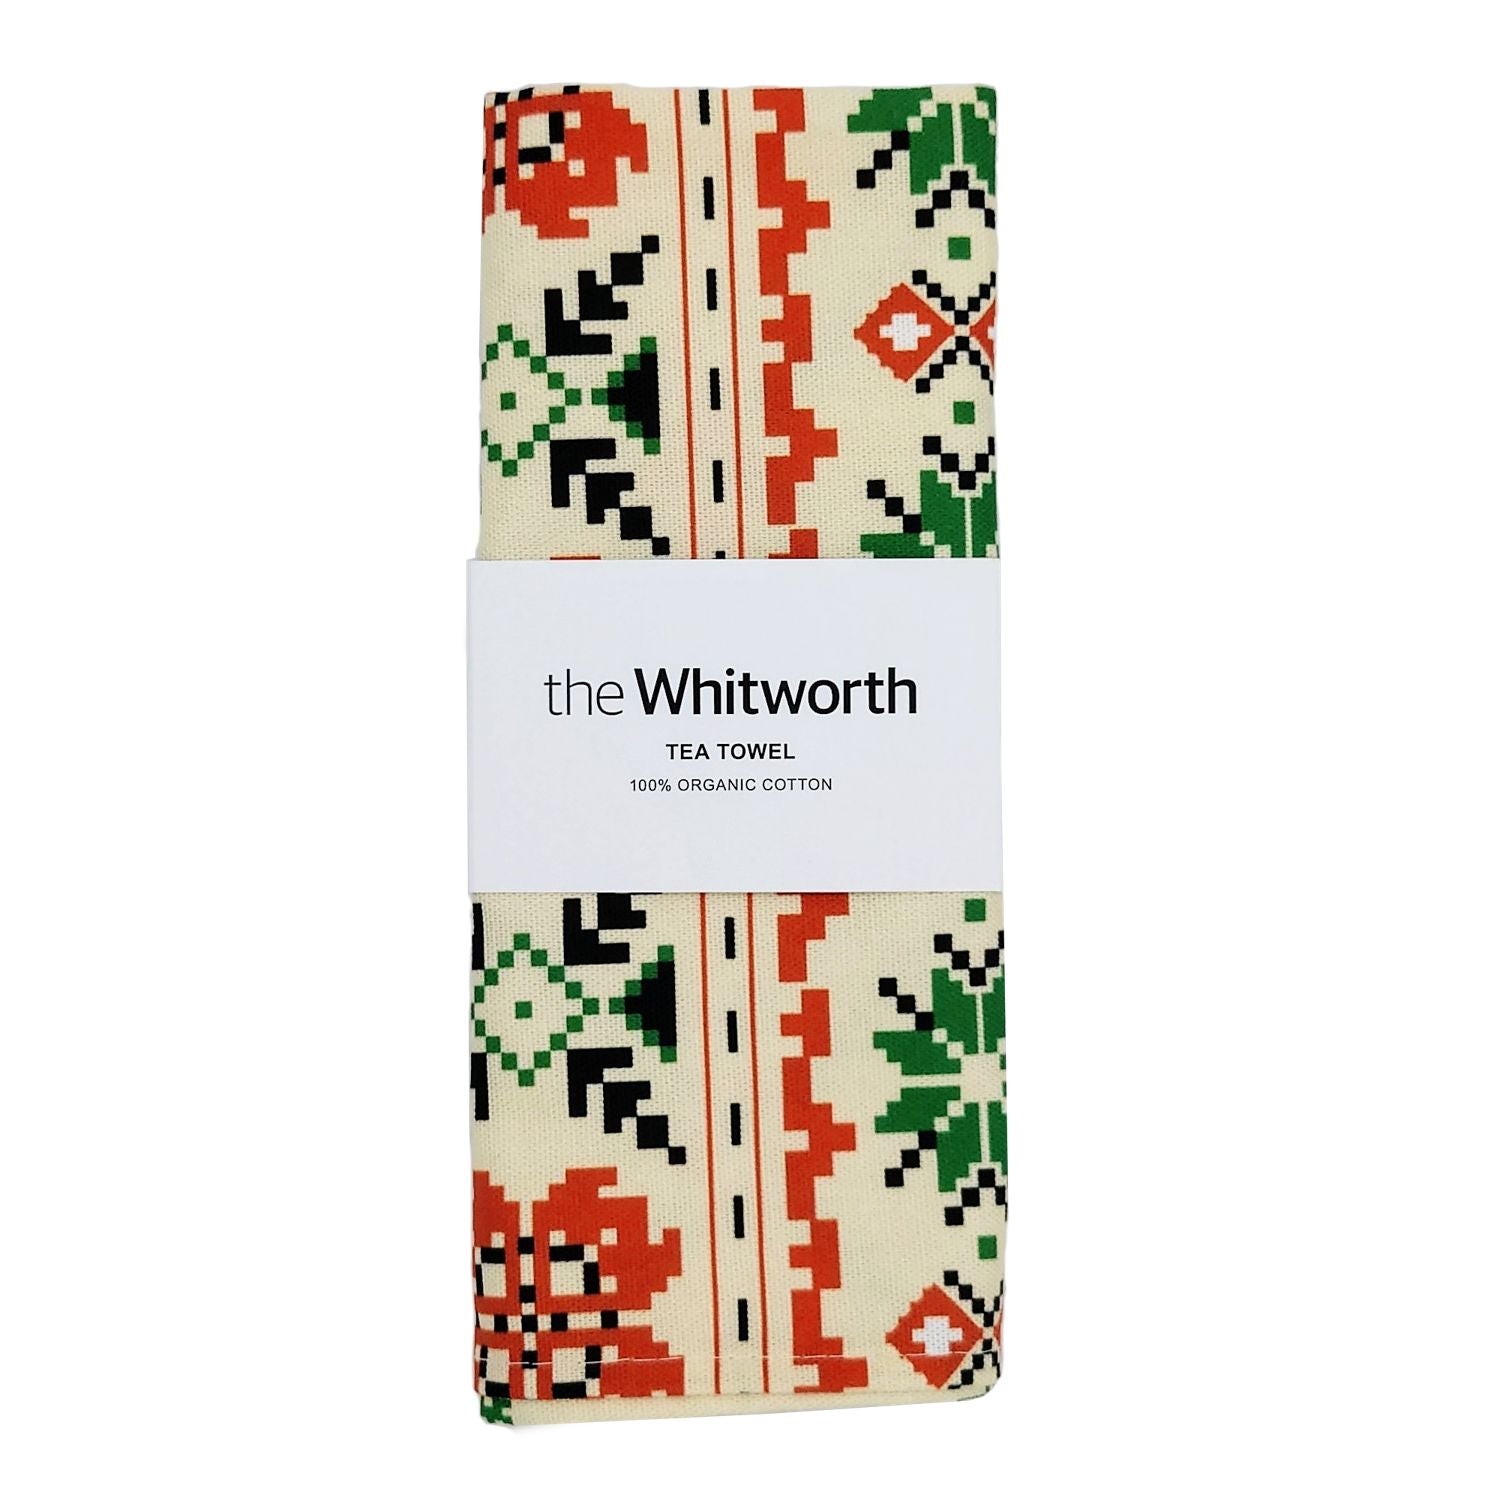 Folded tea towel with a white belly band around the middle. Black text on belly band: The Whitworth, Tea towel, 100% organic cotton. The tea towel has a beige background and green and orange floral and geometric patterning.